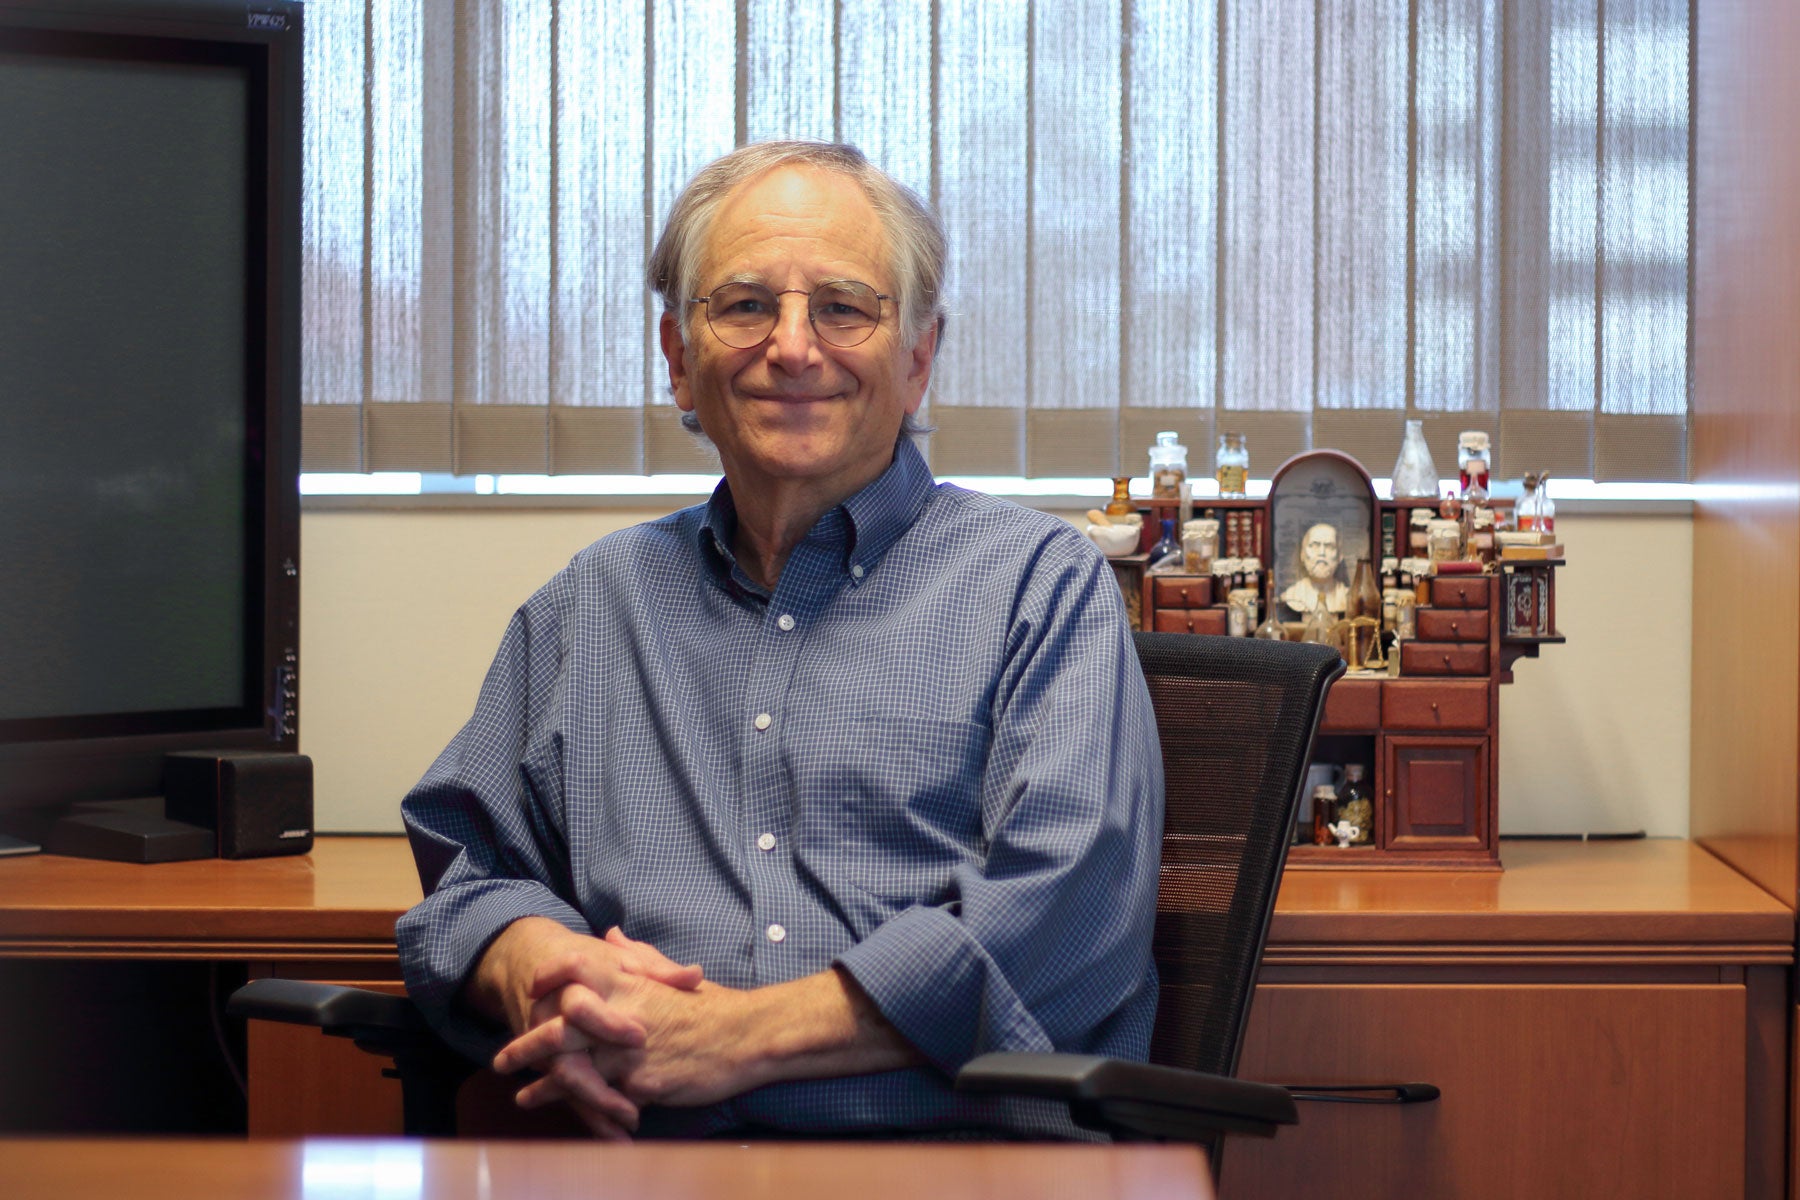 Len Adleman in his office at USC